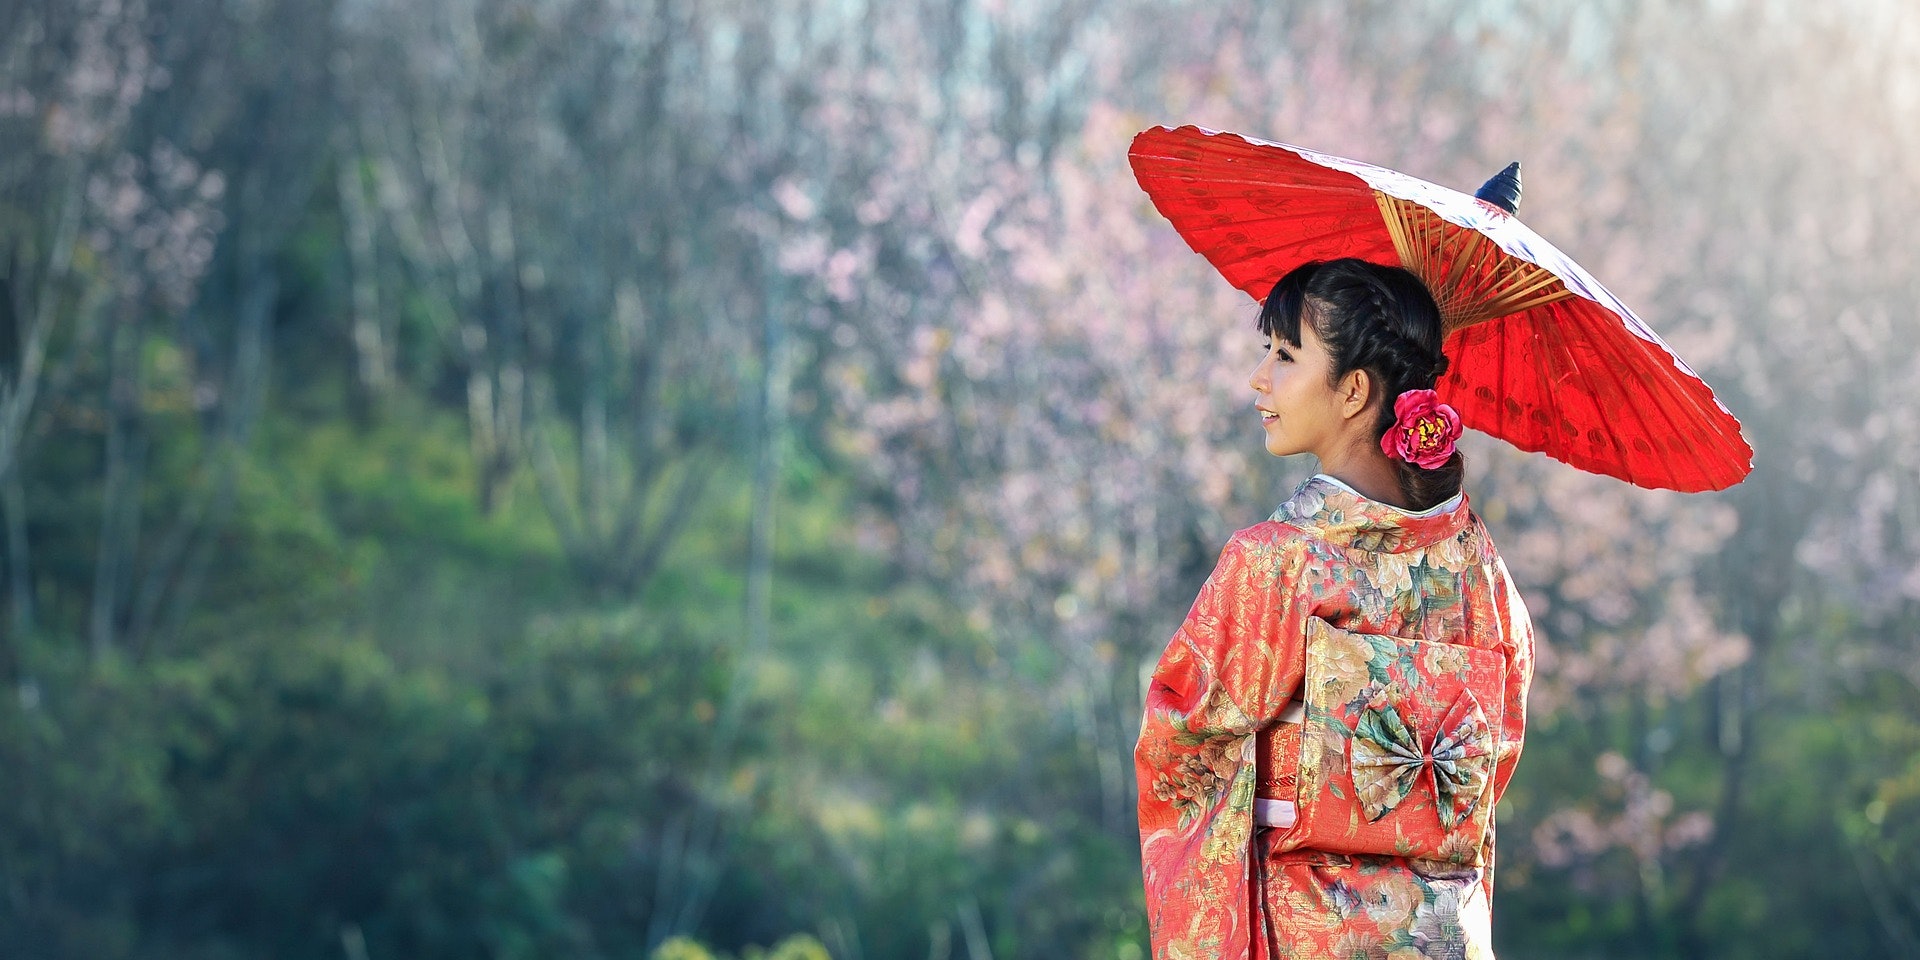 12 Fun Facts About Japan and Its Culture